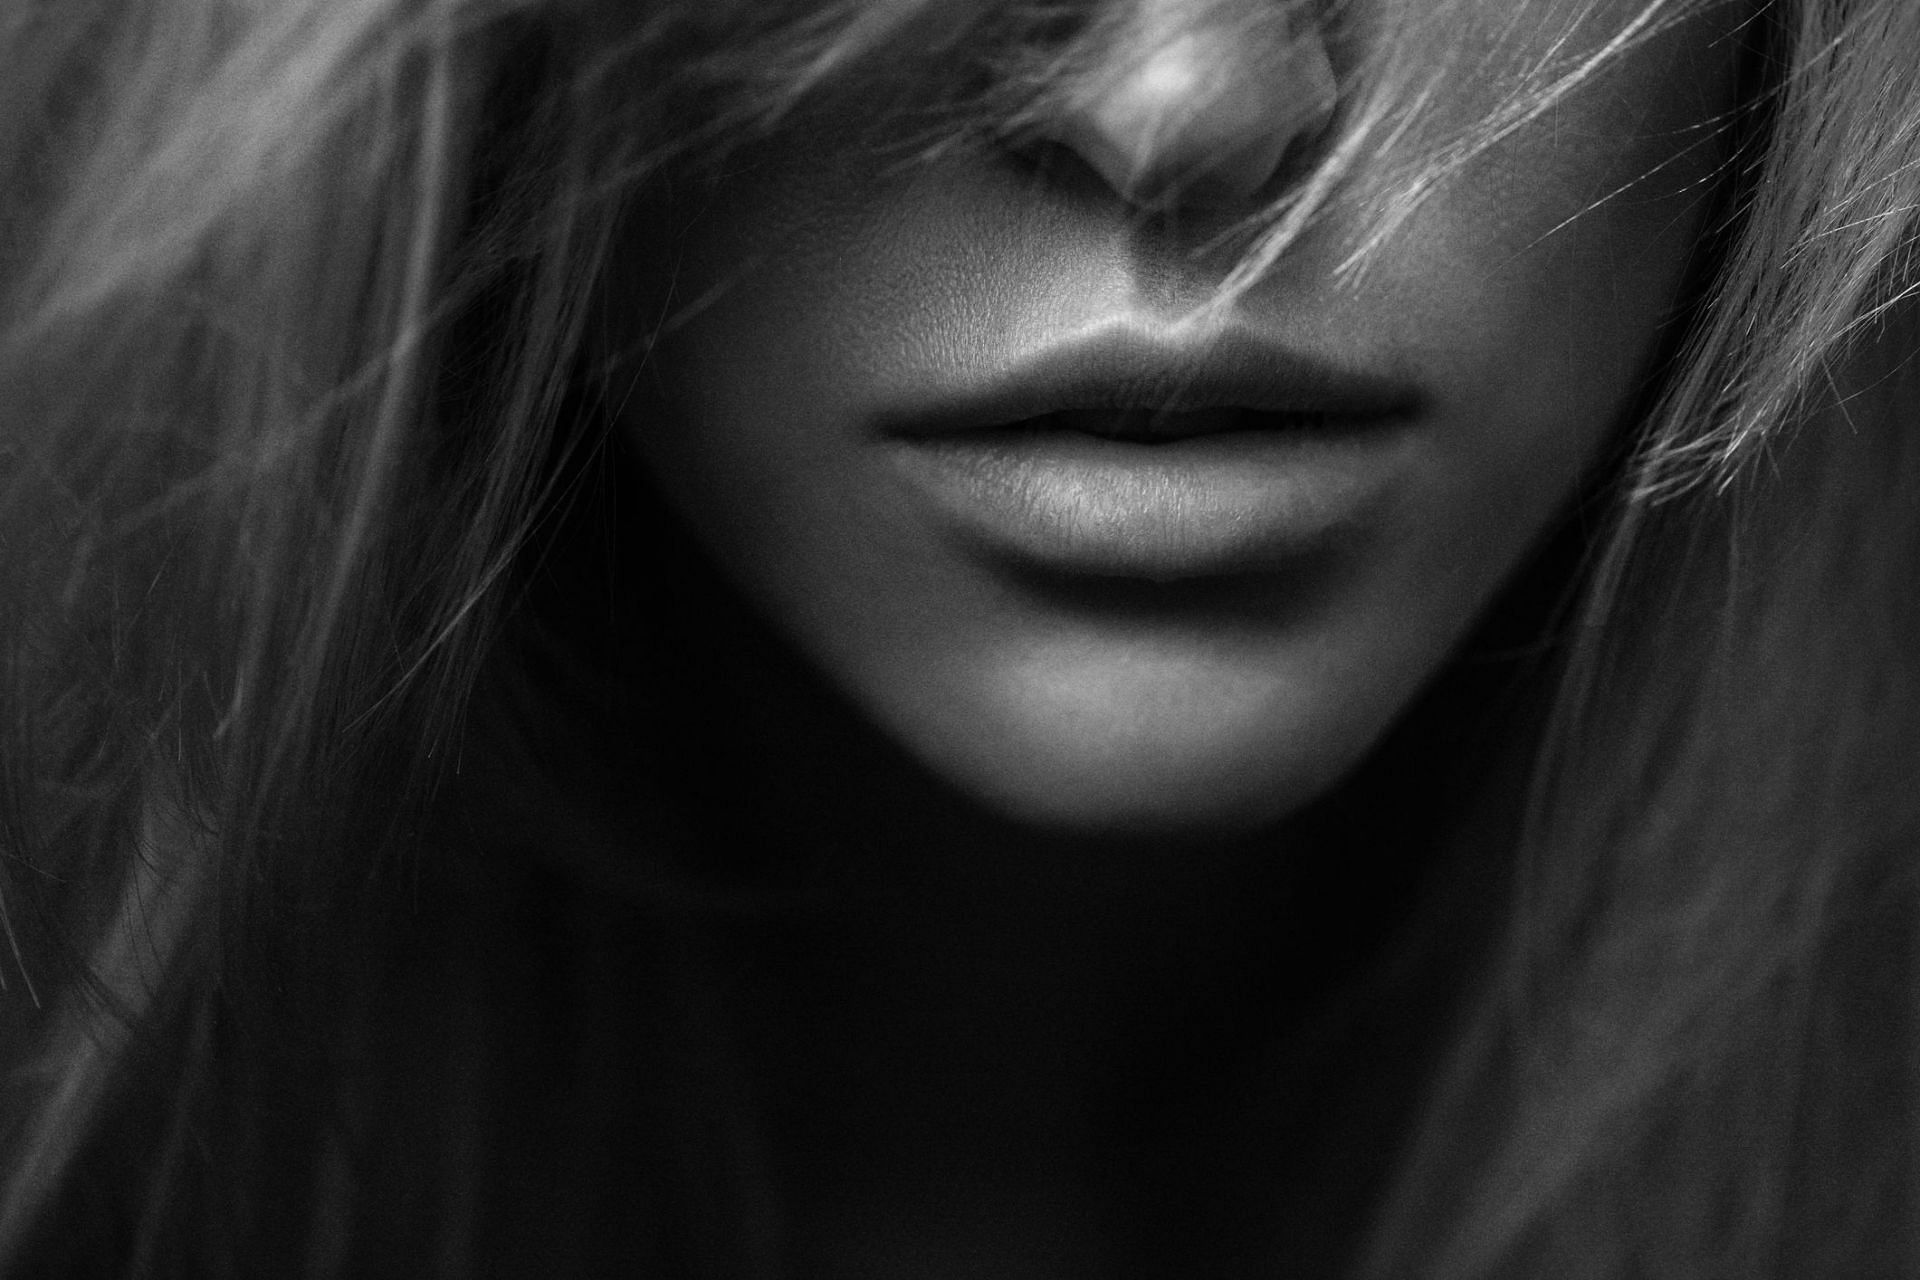 Home remedies for darker lips (Image via Getty Images/CoffeeAndMilk)